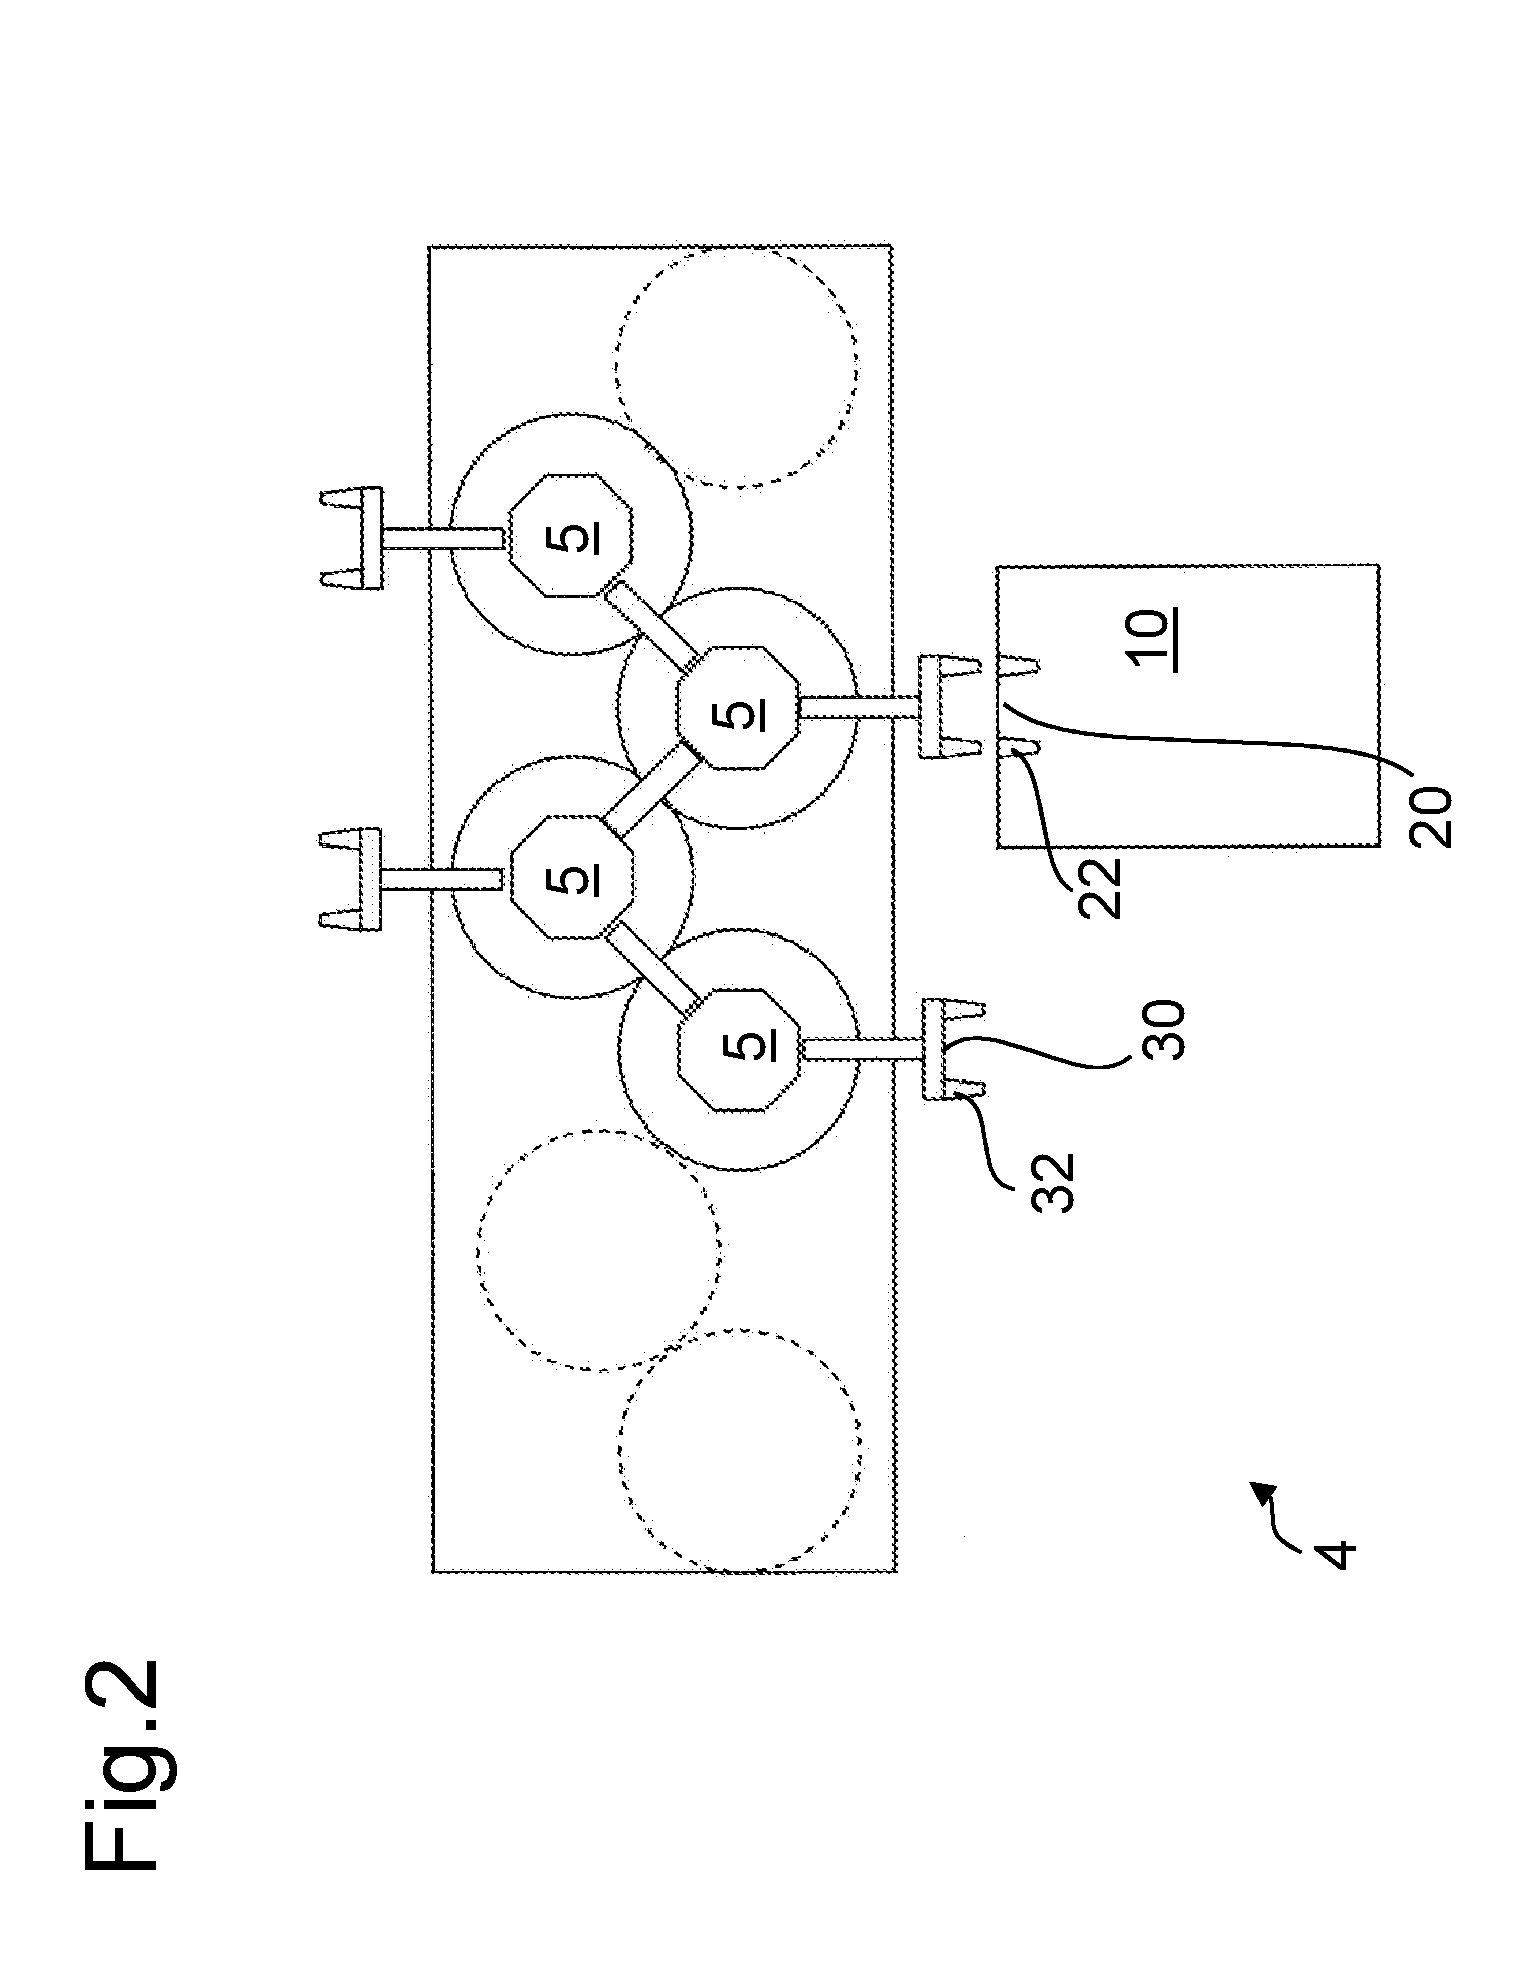 Container treatment system and handling device